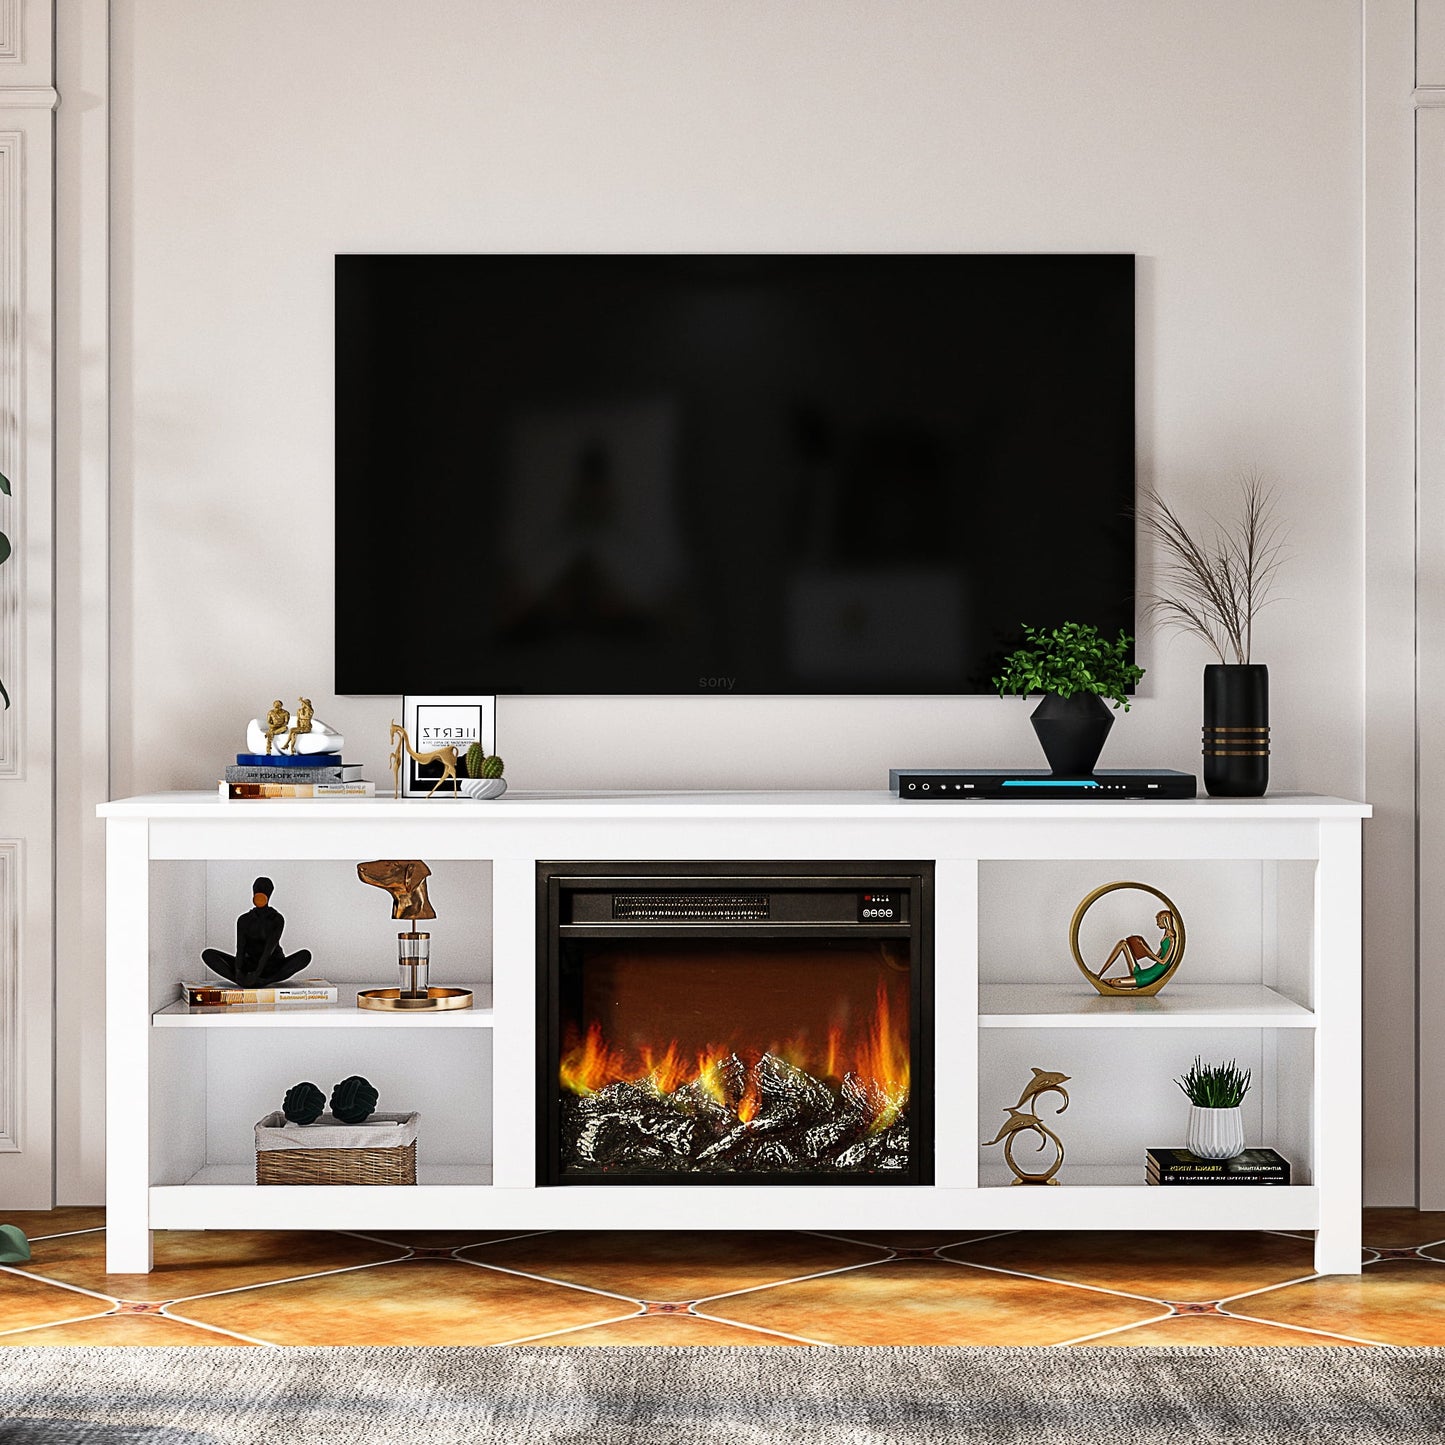 SYNGAR Fireplace TV Stand for TVs up to 65 inches, 58 Inch, Espresso, D3182